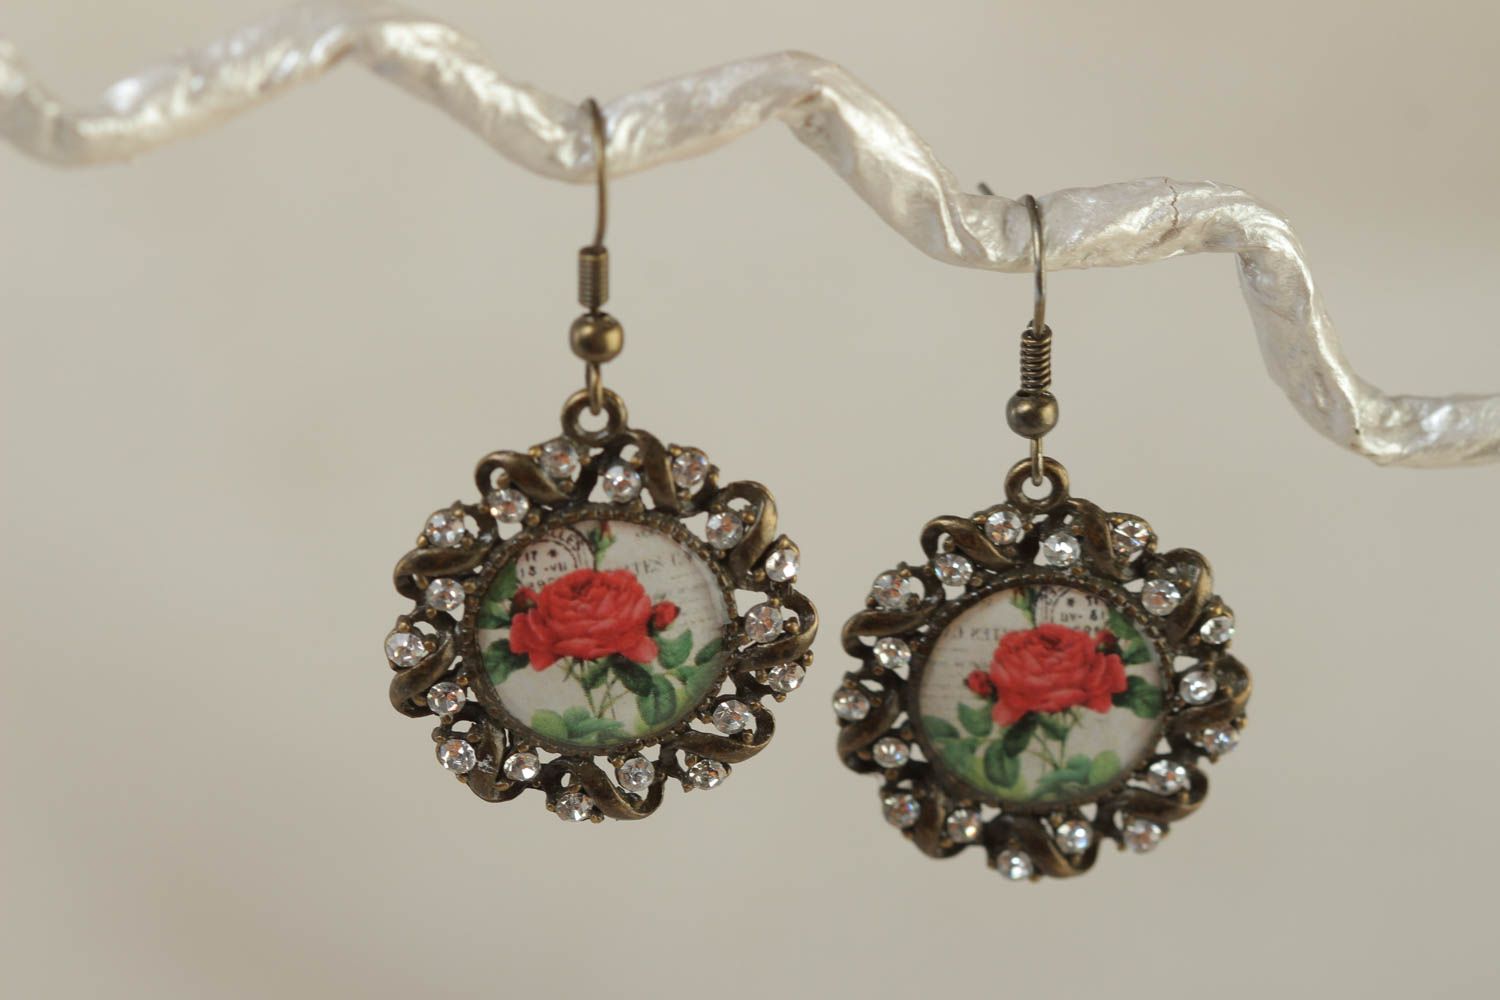 Handmade stylish earrings made of glassy glaze and metal with beads in vintage style photo 1